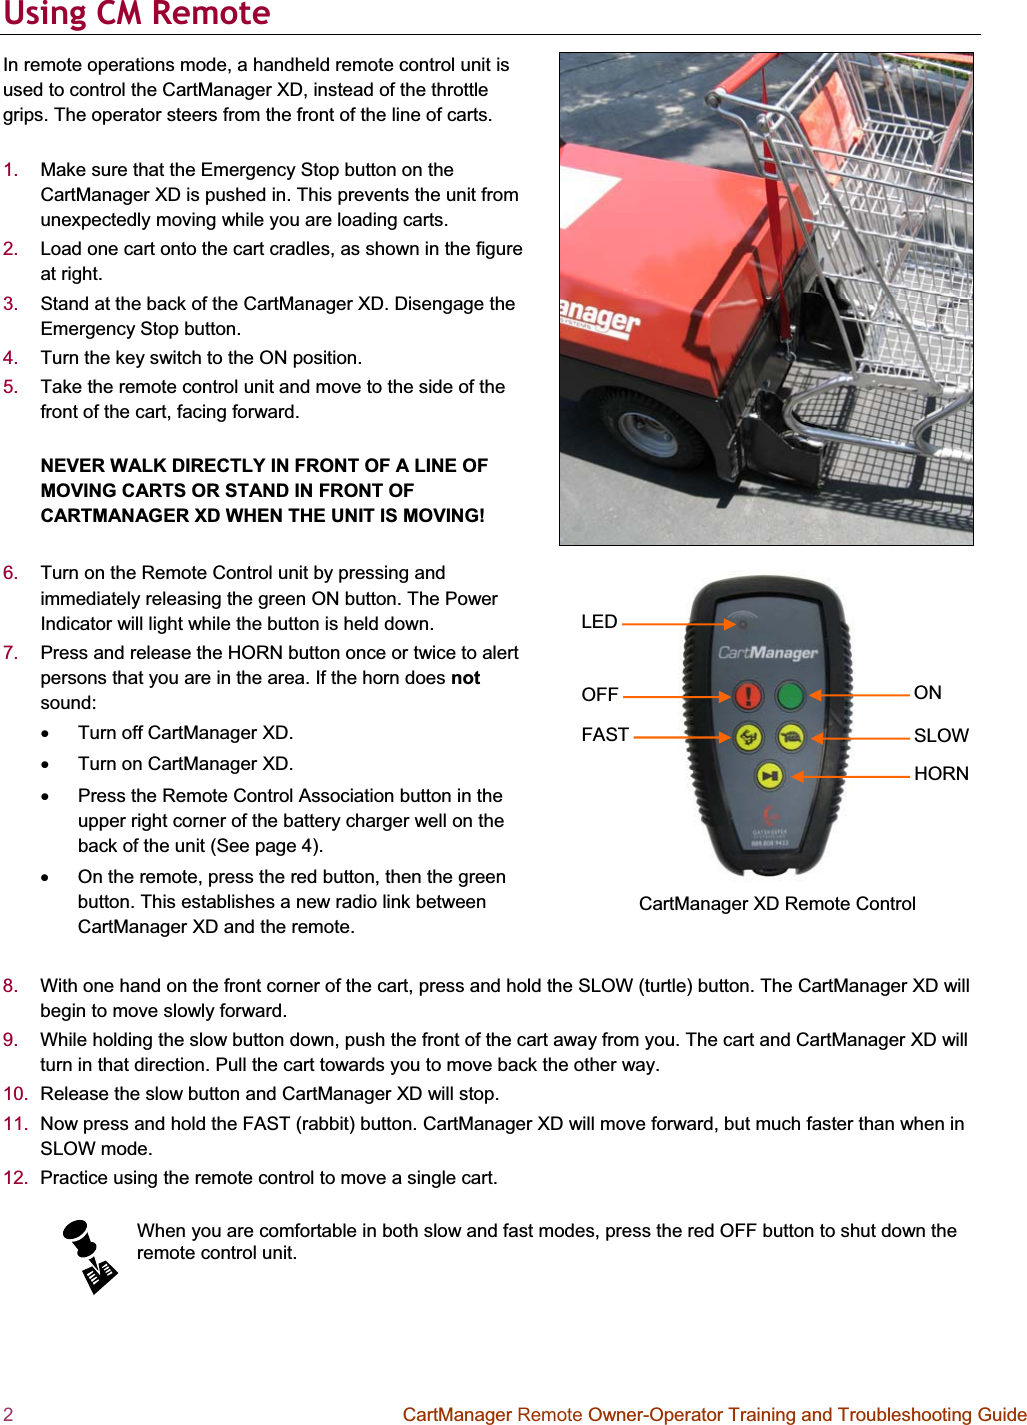 2  CartManager Remote Owner-Operator Training and Troubleshooting Guide LEDOFFFASTONSLOWHORNCartManager XD Remote Control Using CM Remote  In remote operations mode, a handheld remote control unit is used to control the CartManager XD, instead of the throttle grips. The operator steers from the front of the line of carts.  1. Make sure that the Emergency Stop button on the CartManager XD is pushed in. This prevents the unit from unexpectedly moving while you are loading carts.  2. Load one cart onto the cart cradles, as shown in the figure at right. 3. Stand at the back of the CartManager XD. Disengage the Emergency Stop button.  4. Turn the key switch to the ON position.  5. Take the remote control unit and move to the side of the front of the cart, facing forward.  NEVER WALK DIRECTLY IN FRONT OF A LINE OF MOVING CARTS OR STAND IN FRONT OF CARTMANAGER XD WHEN THE UNIT IS MOVING! 6. Turn on the Remote Control unit by pressing and immediately releasing the green ON button. The Power Indicator will light while the button is held down.  7. Press and release the HORN button once or twice to alert persons that you are in the area. If the horn does notsound: x  Turn off CartManager XD.  x  Turn on CartManager XD.  x  Press the Remote Control Association button in the upper right corner of the battery charger well on the back of the unit (See page 4).x  On the remote, press the red button, then the green button. This establishes a new radio link between CartManager XD and the remote.  8. With one hand on the front corner of the cart, press and hold the SLOW (turtle) button. The CartManager XD will begin to move slowly forward.  9. While holding the slow button down, push the front of the cart away from you. The cart and CartManager XD will turn in that direction. Pull the cart towards you to move back the other way.  10.  Release the slow button and CartManager XD will stop.  11.  Now press and hold the FAST (rabbit) button. CartManager XD will move forward, but much faster than when in SLOW mode.  12.  Practice using the remote control to move a single cart.  When you are comfortable in both slow and fast modes, press the red OFF button to shut down the remote control unit.